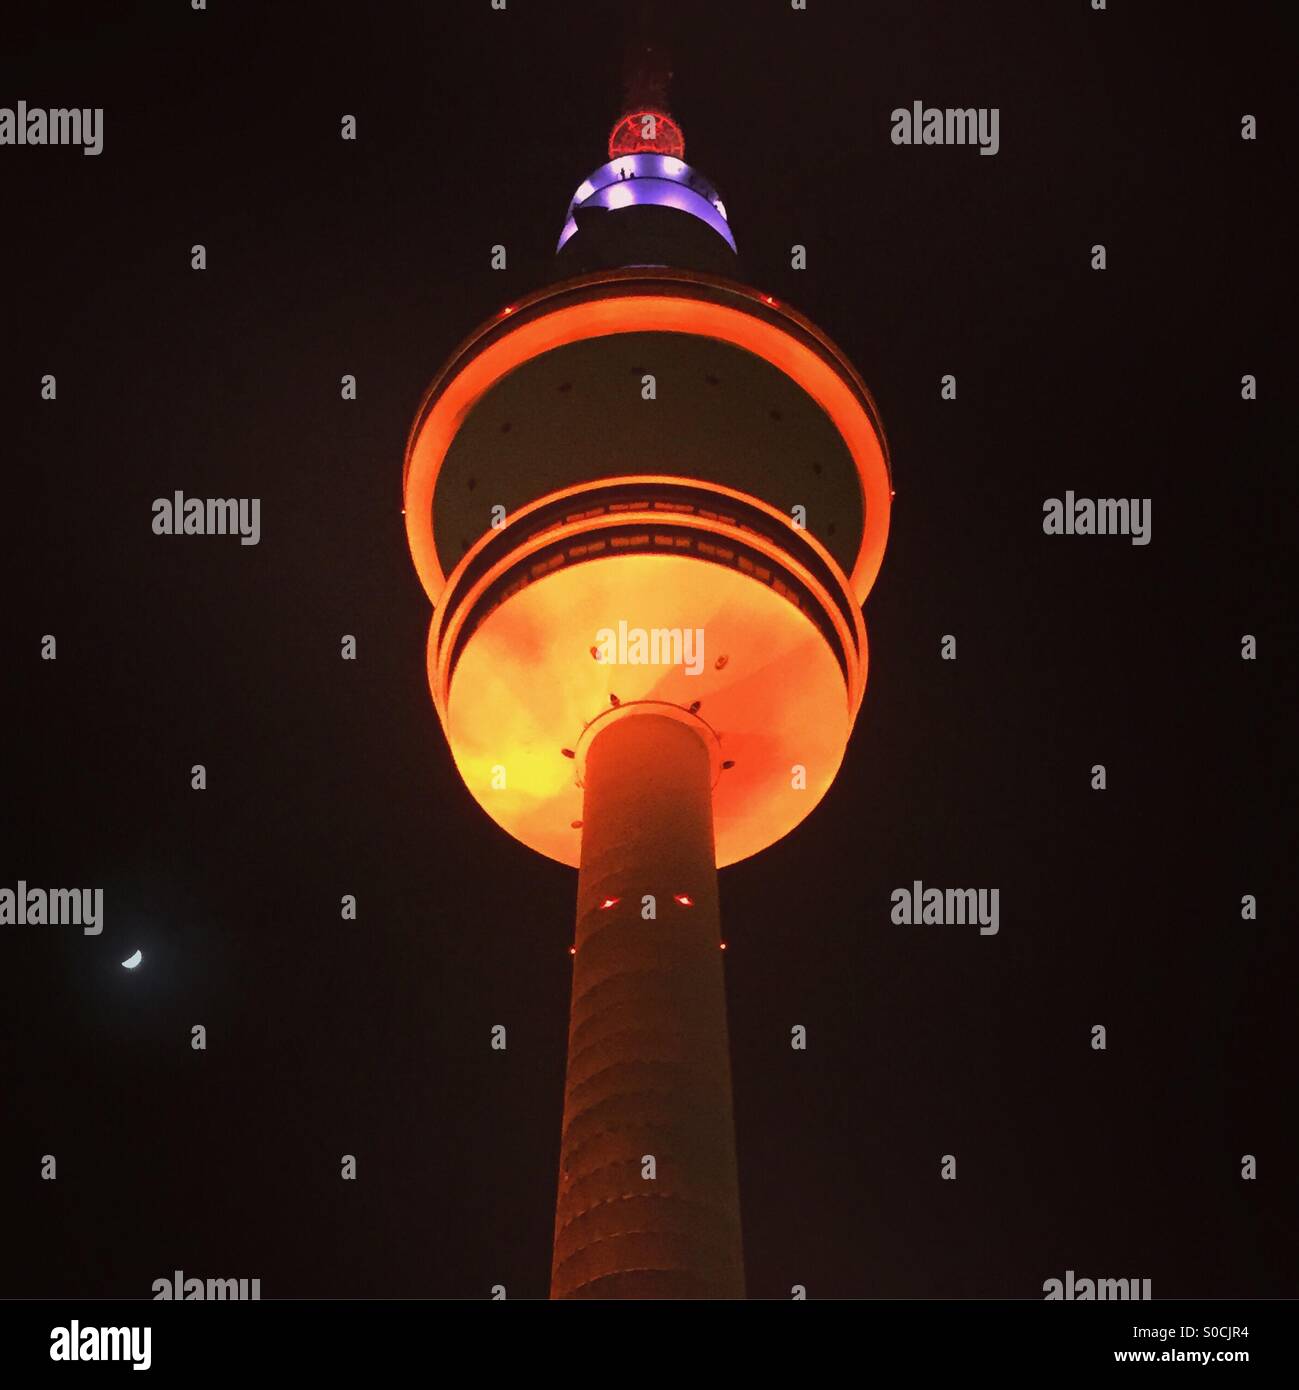 Hamburg's TV tower, the Heinrich Hertz Turm at night in front of the moon. Up-lit with orange and purple lights Stock Photo